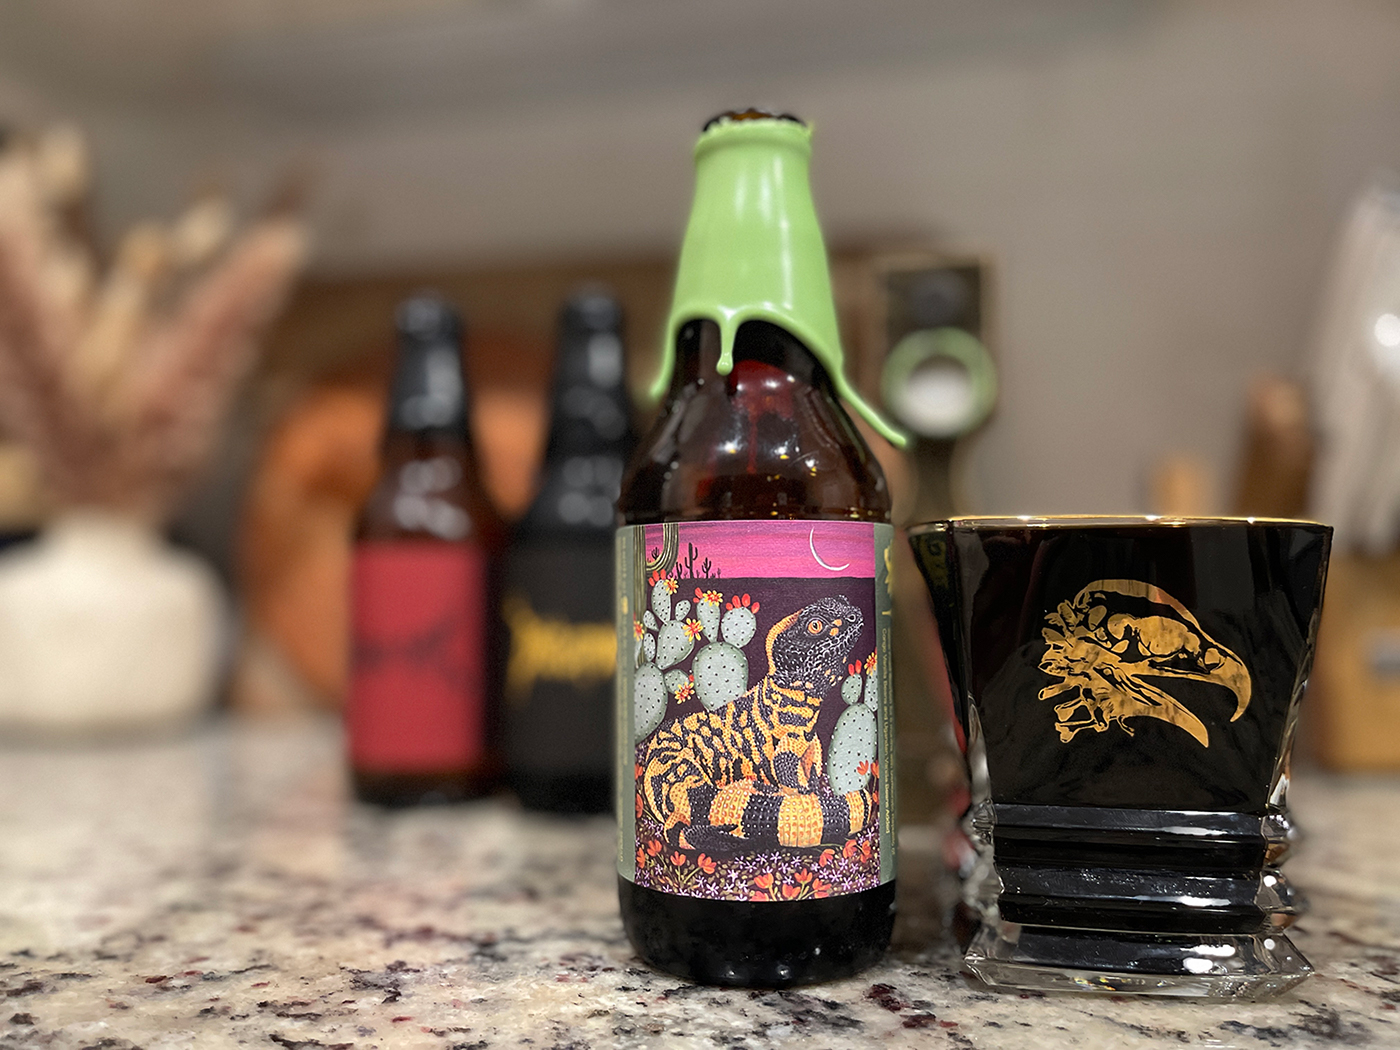 Review image, Horus's Heelluh Quad Oaked Imperial Stout